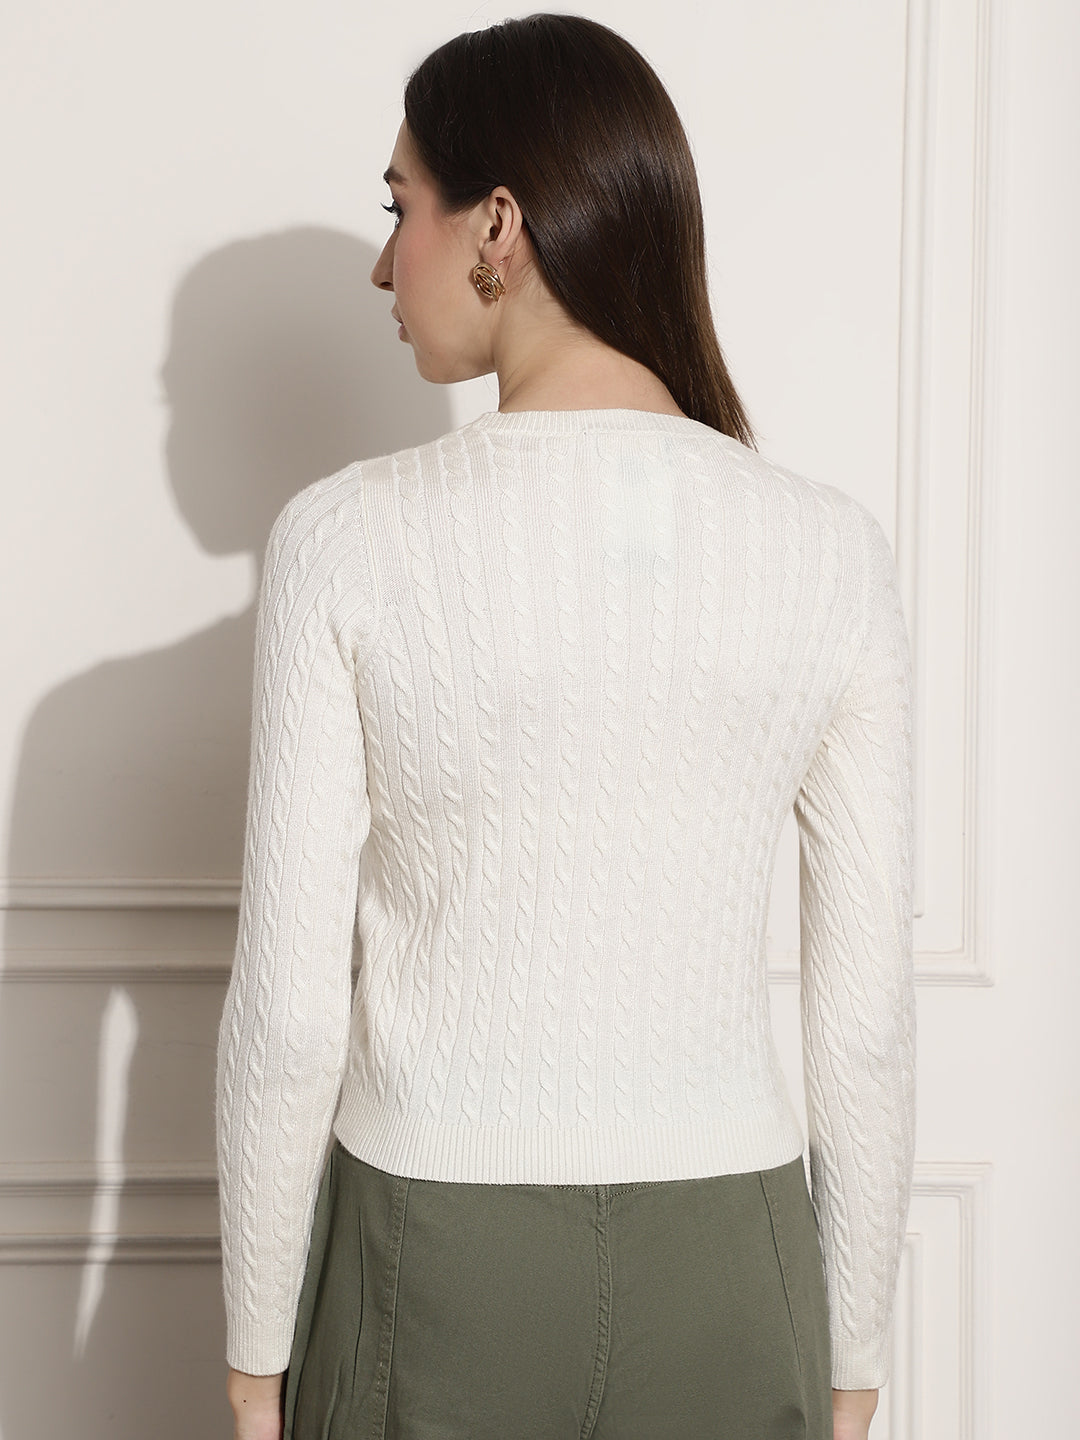 Round Neck Kable Knit White Sweater